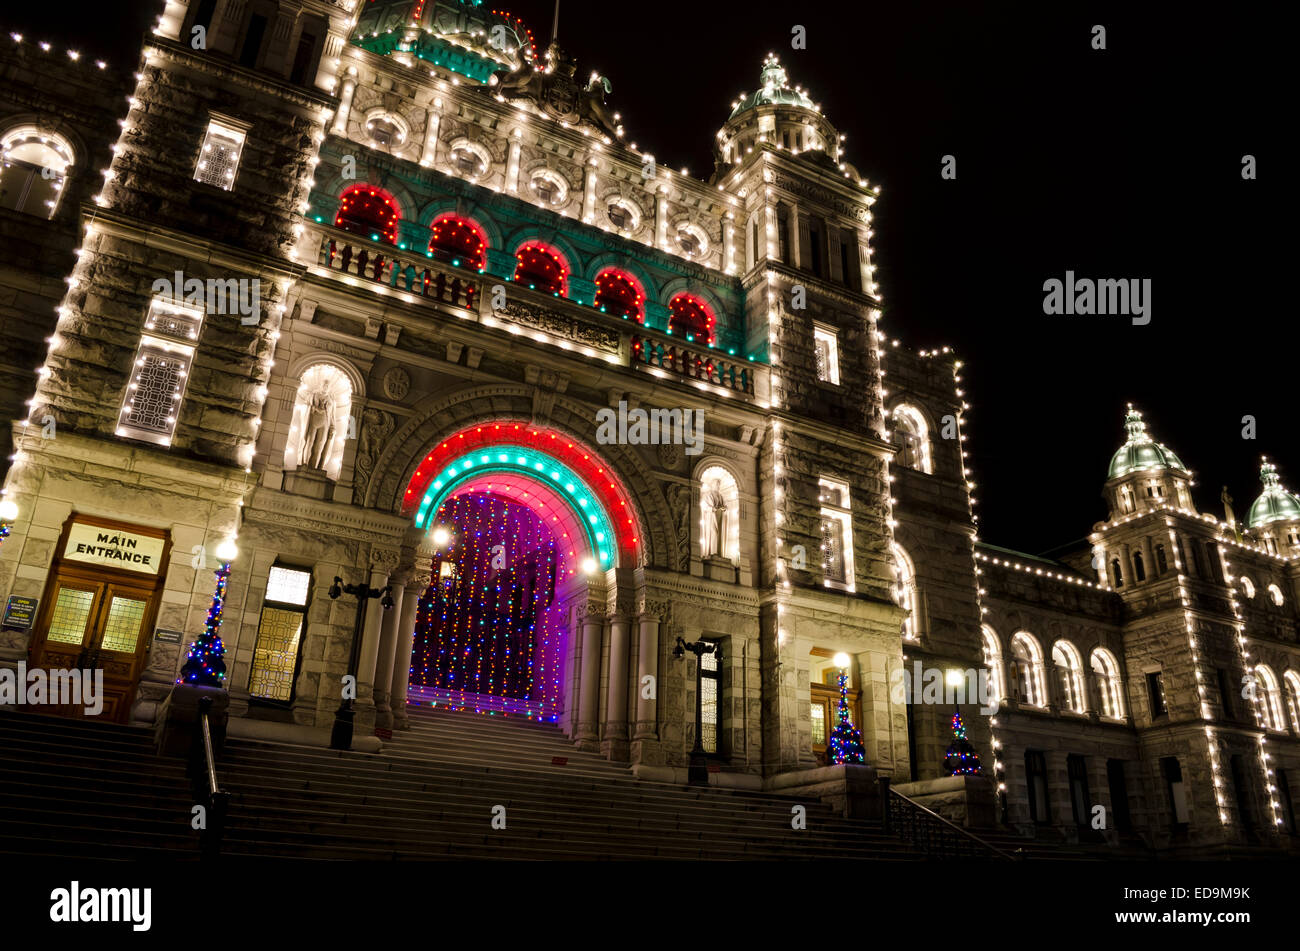 Detailed stonework and statues on the provincial parliament buildings in Victoria, BC, Canada.  Government building lit up. Stock Photo